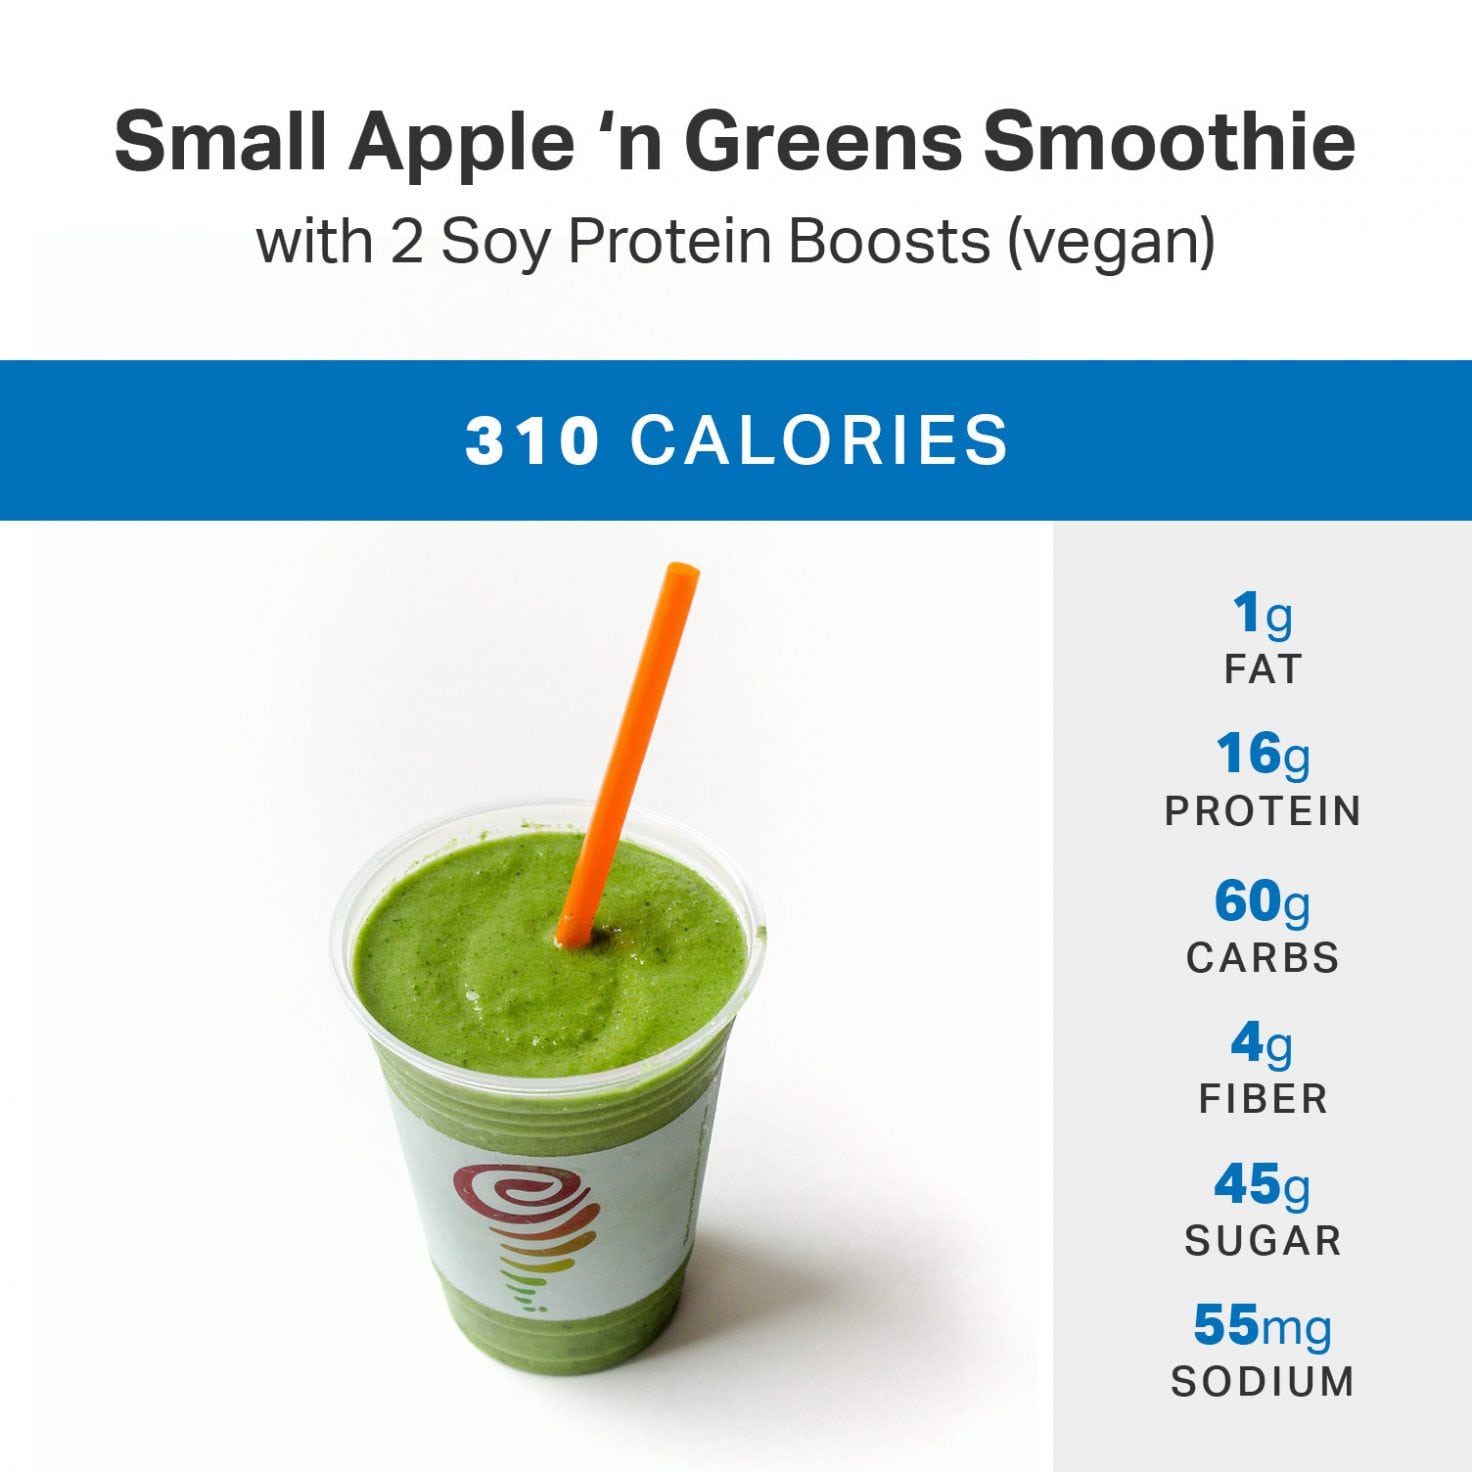 The Healthiest Ways to Order at Jamba Juice | Weight Loss | MyFitnessPal